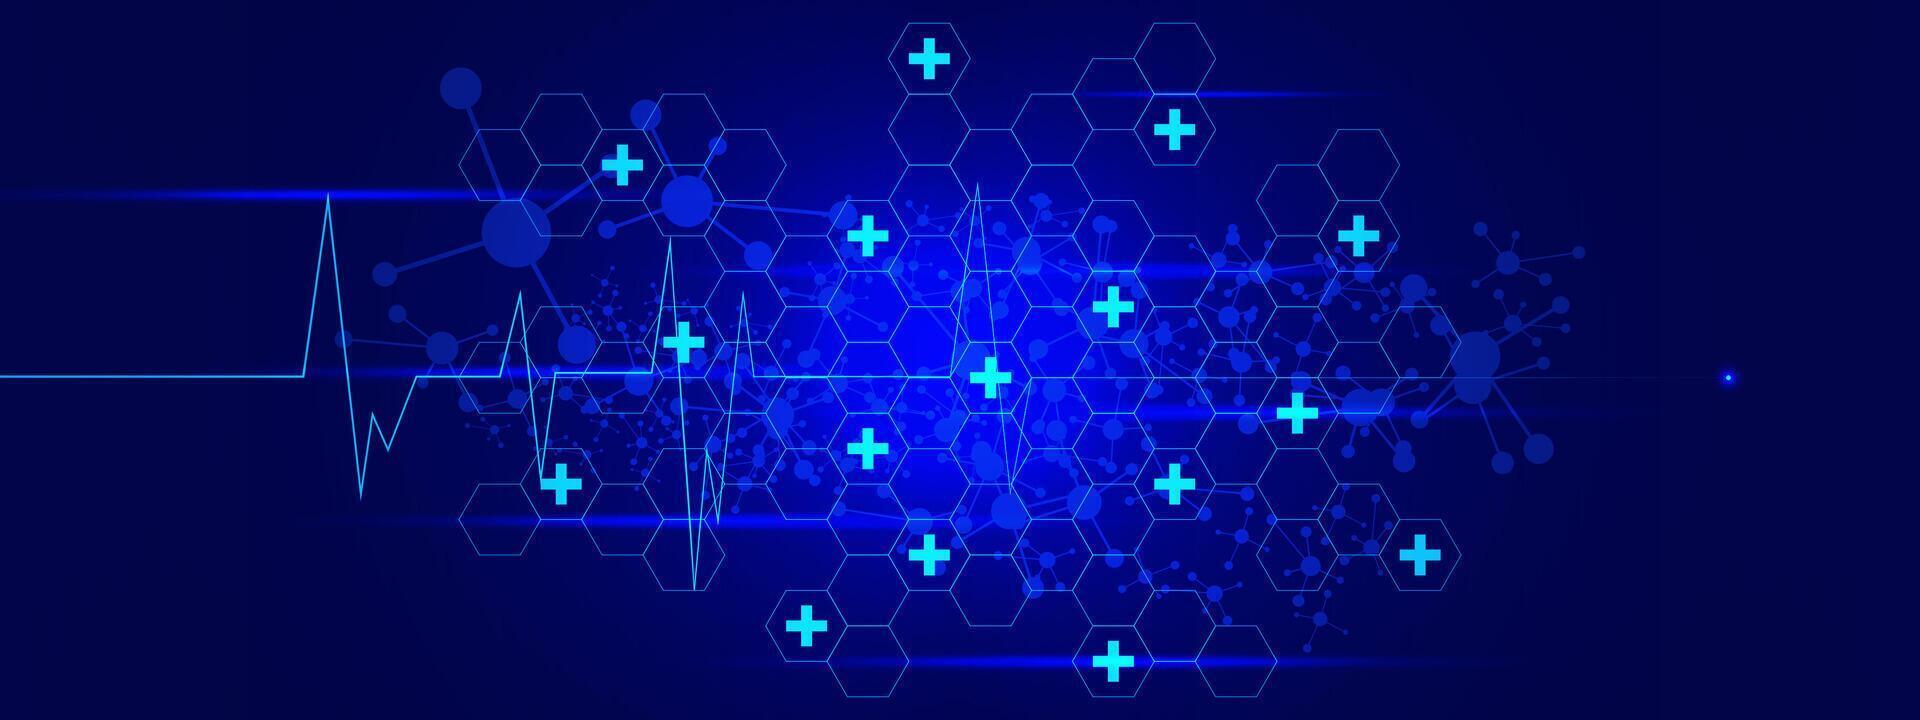 Medical cross with hexagons, molecular structure and hear beat. Medicine, health care, science and technology concept background. Vector illustration.